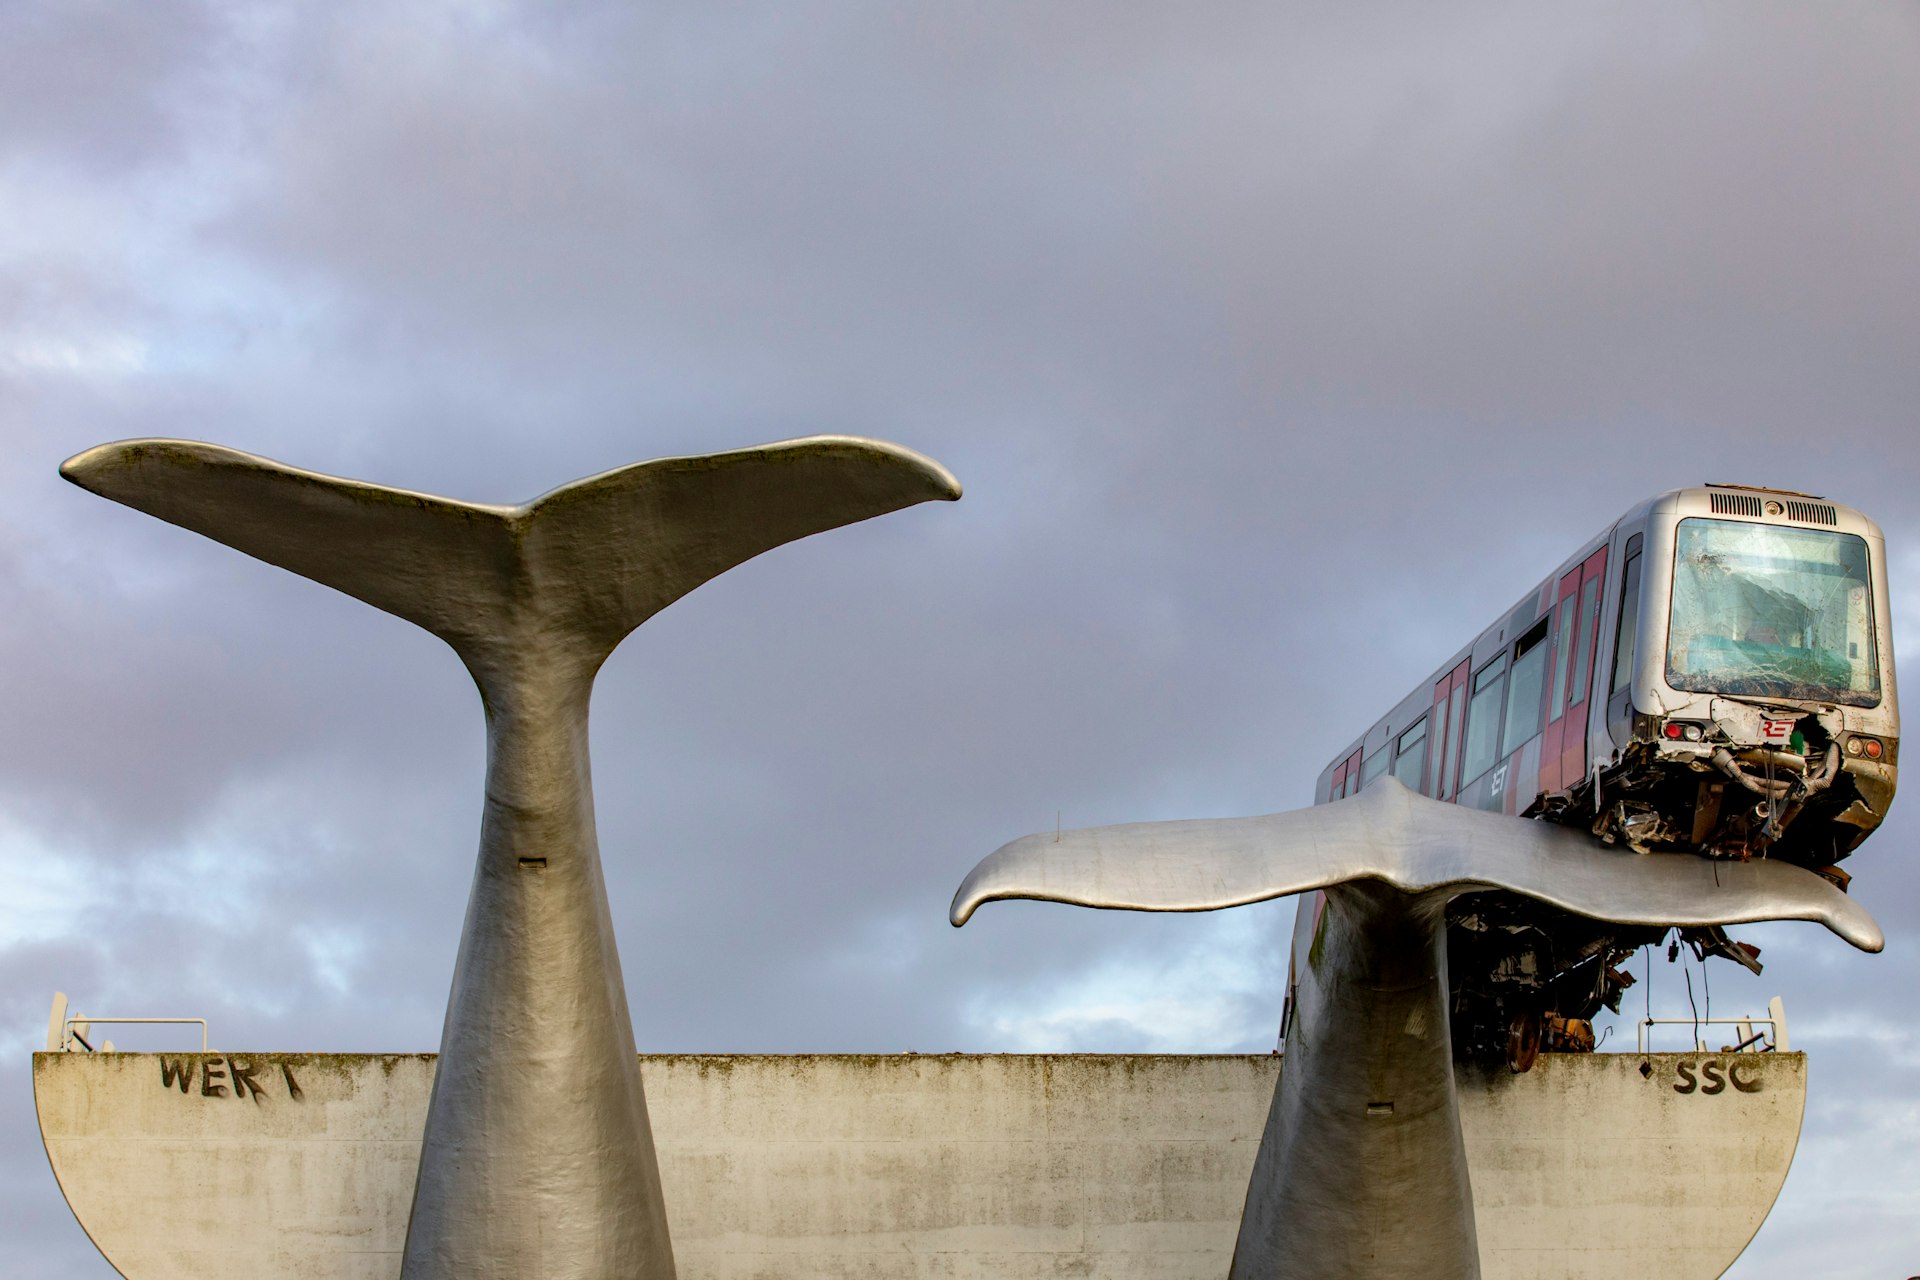 A train that landed on a whale tail sculpture in The Netherlands